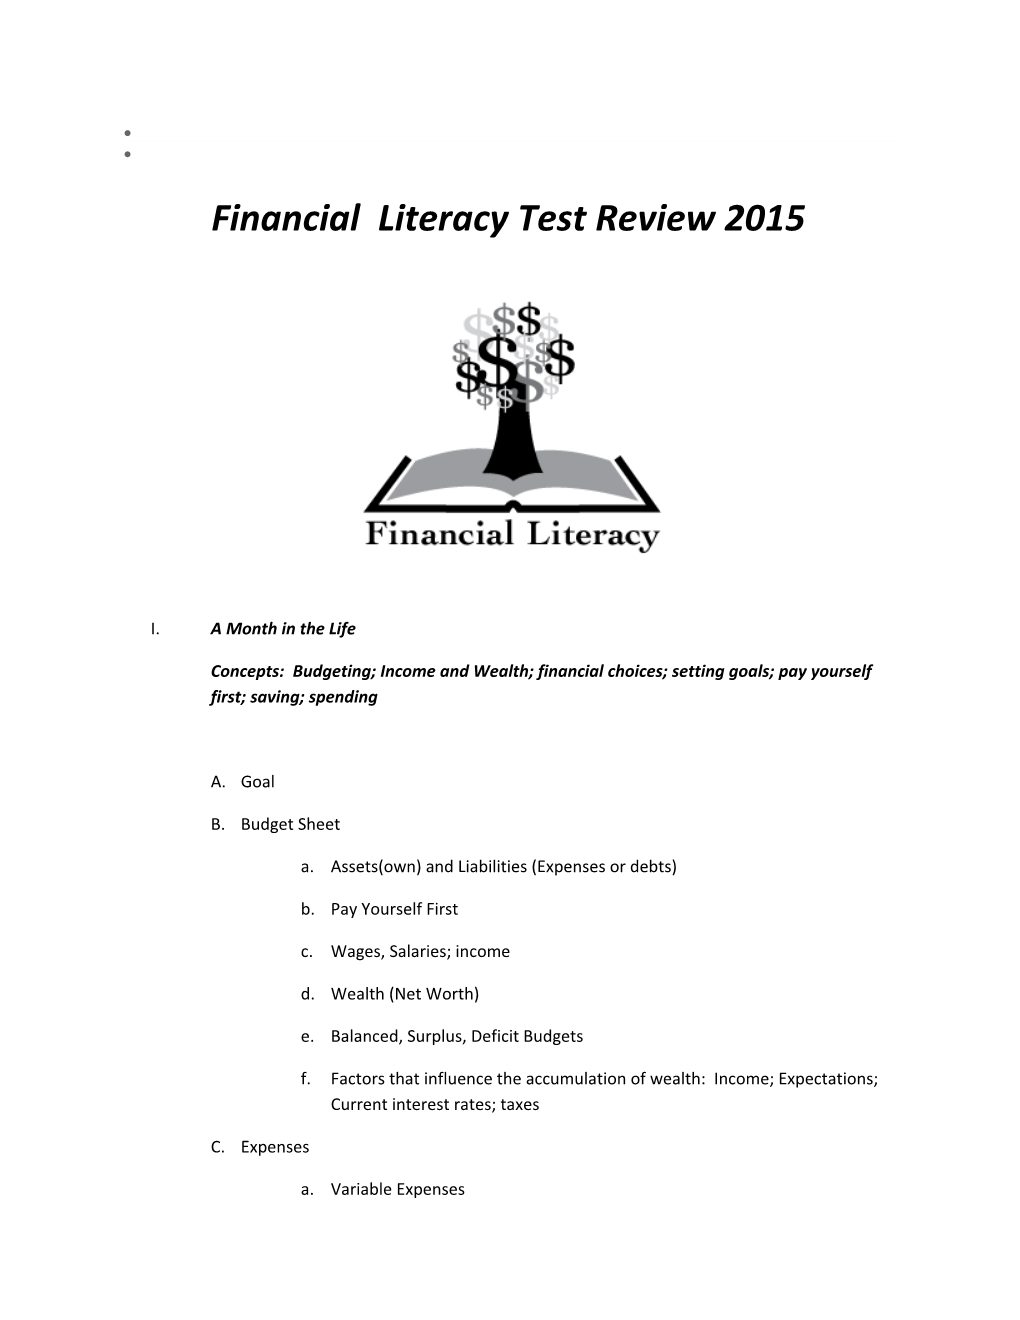 Financial Literacy Test Review 2015